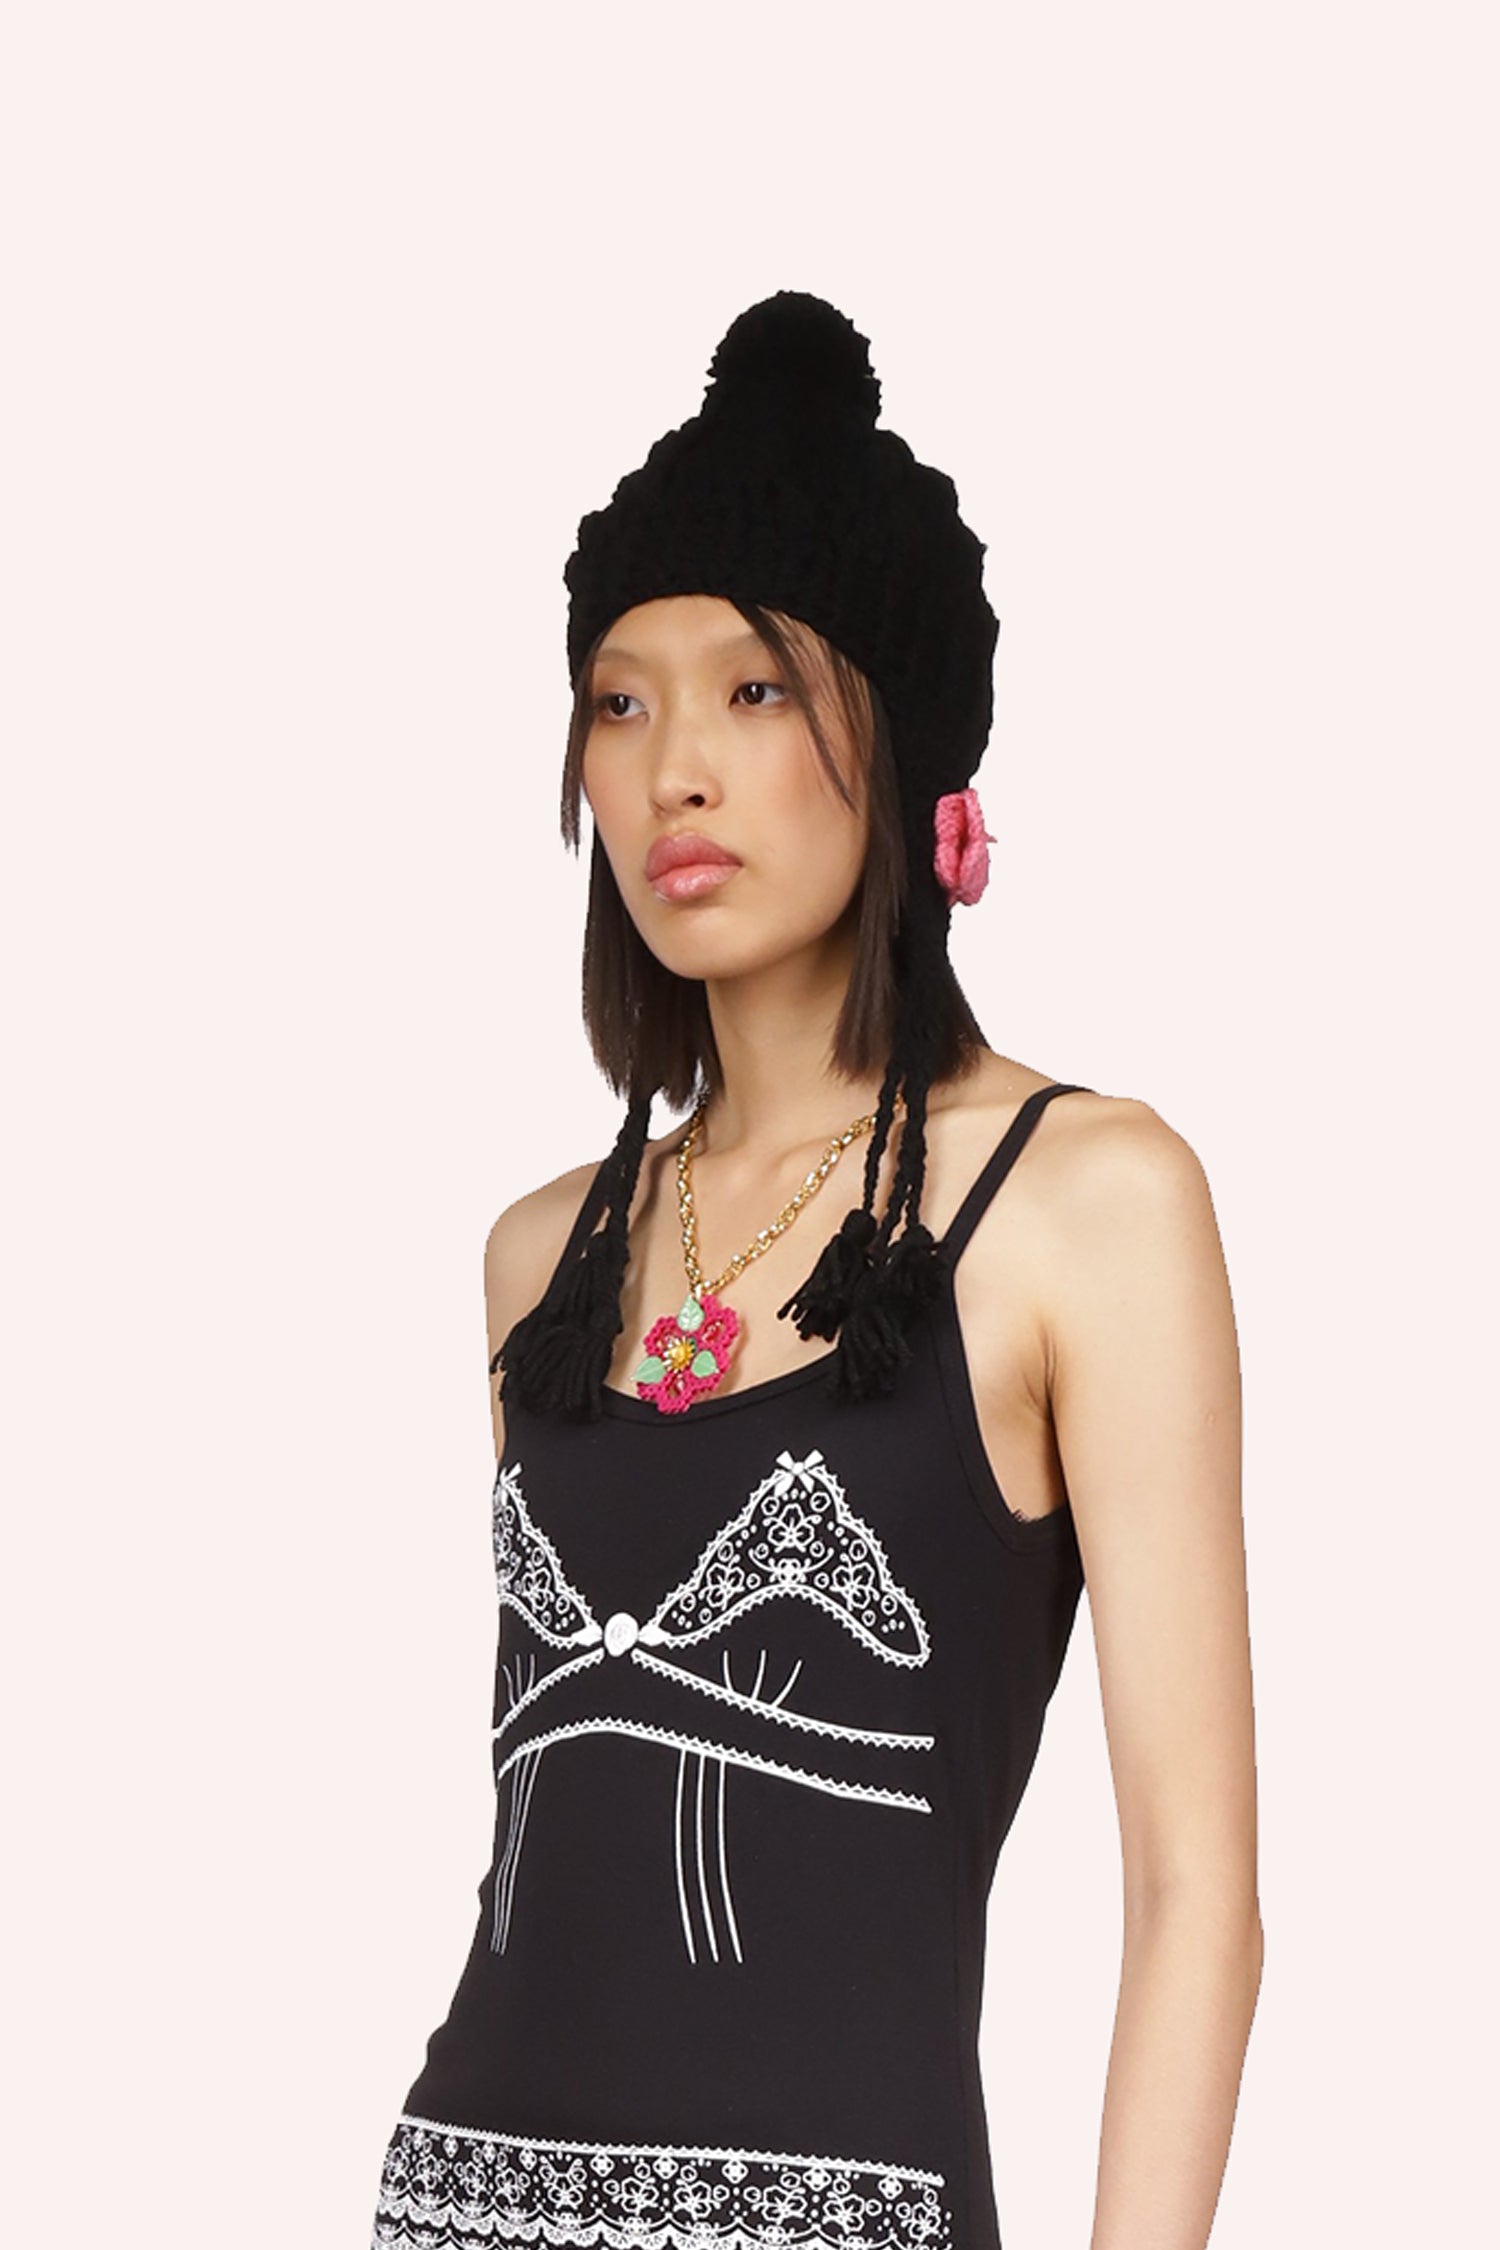 The Anna Sui Butterfly Crochet Hat in black, the hat will be a perfect accessory